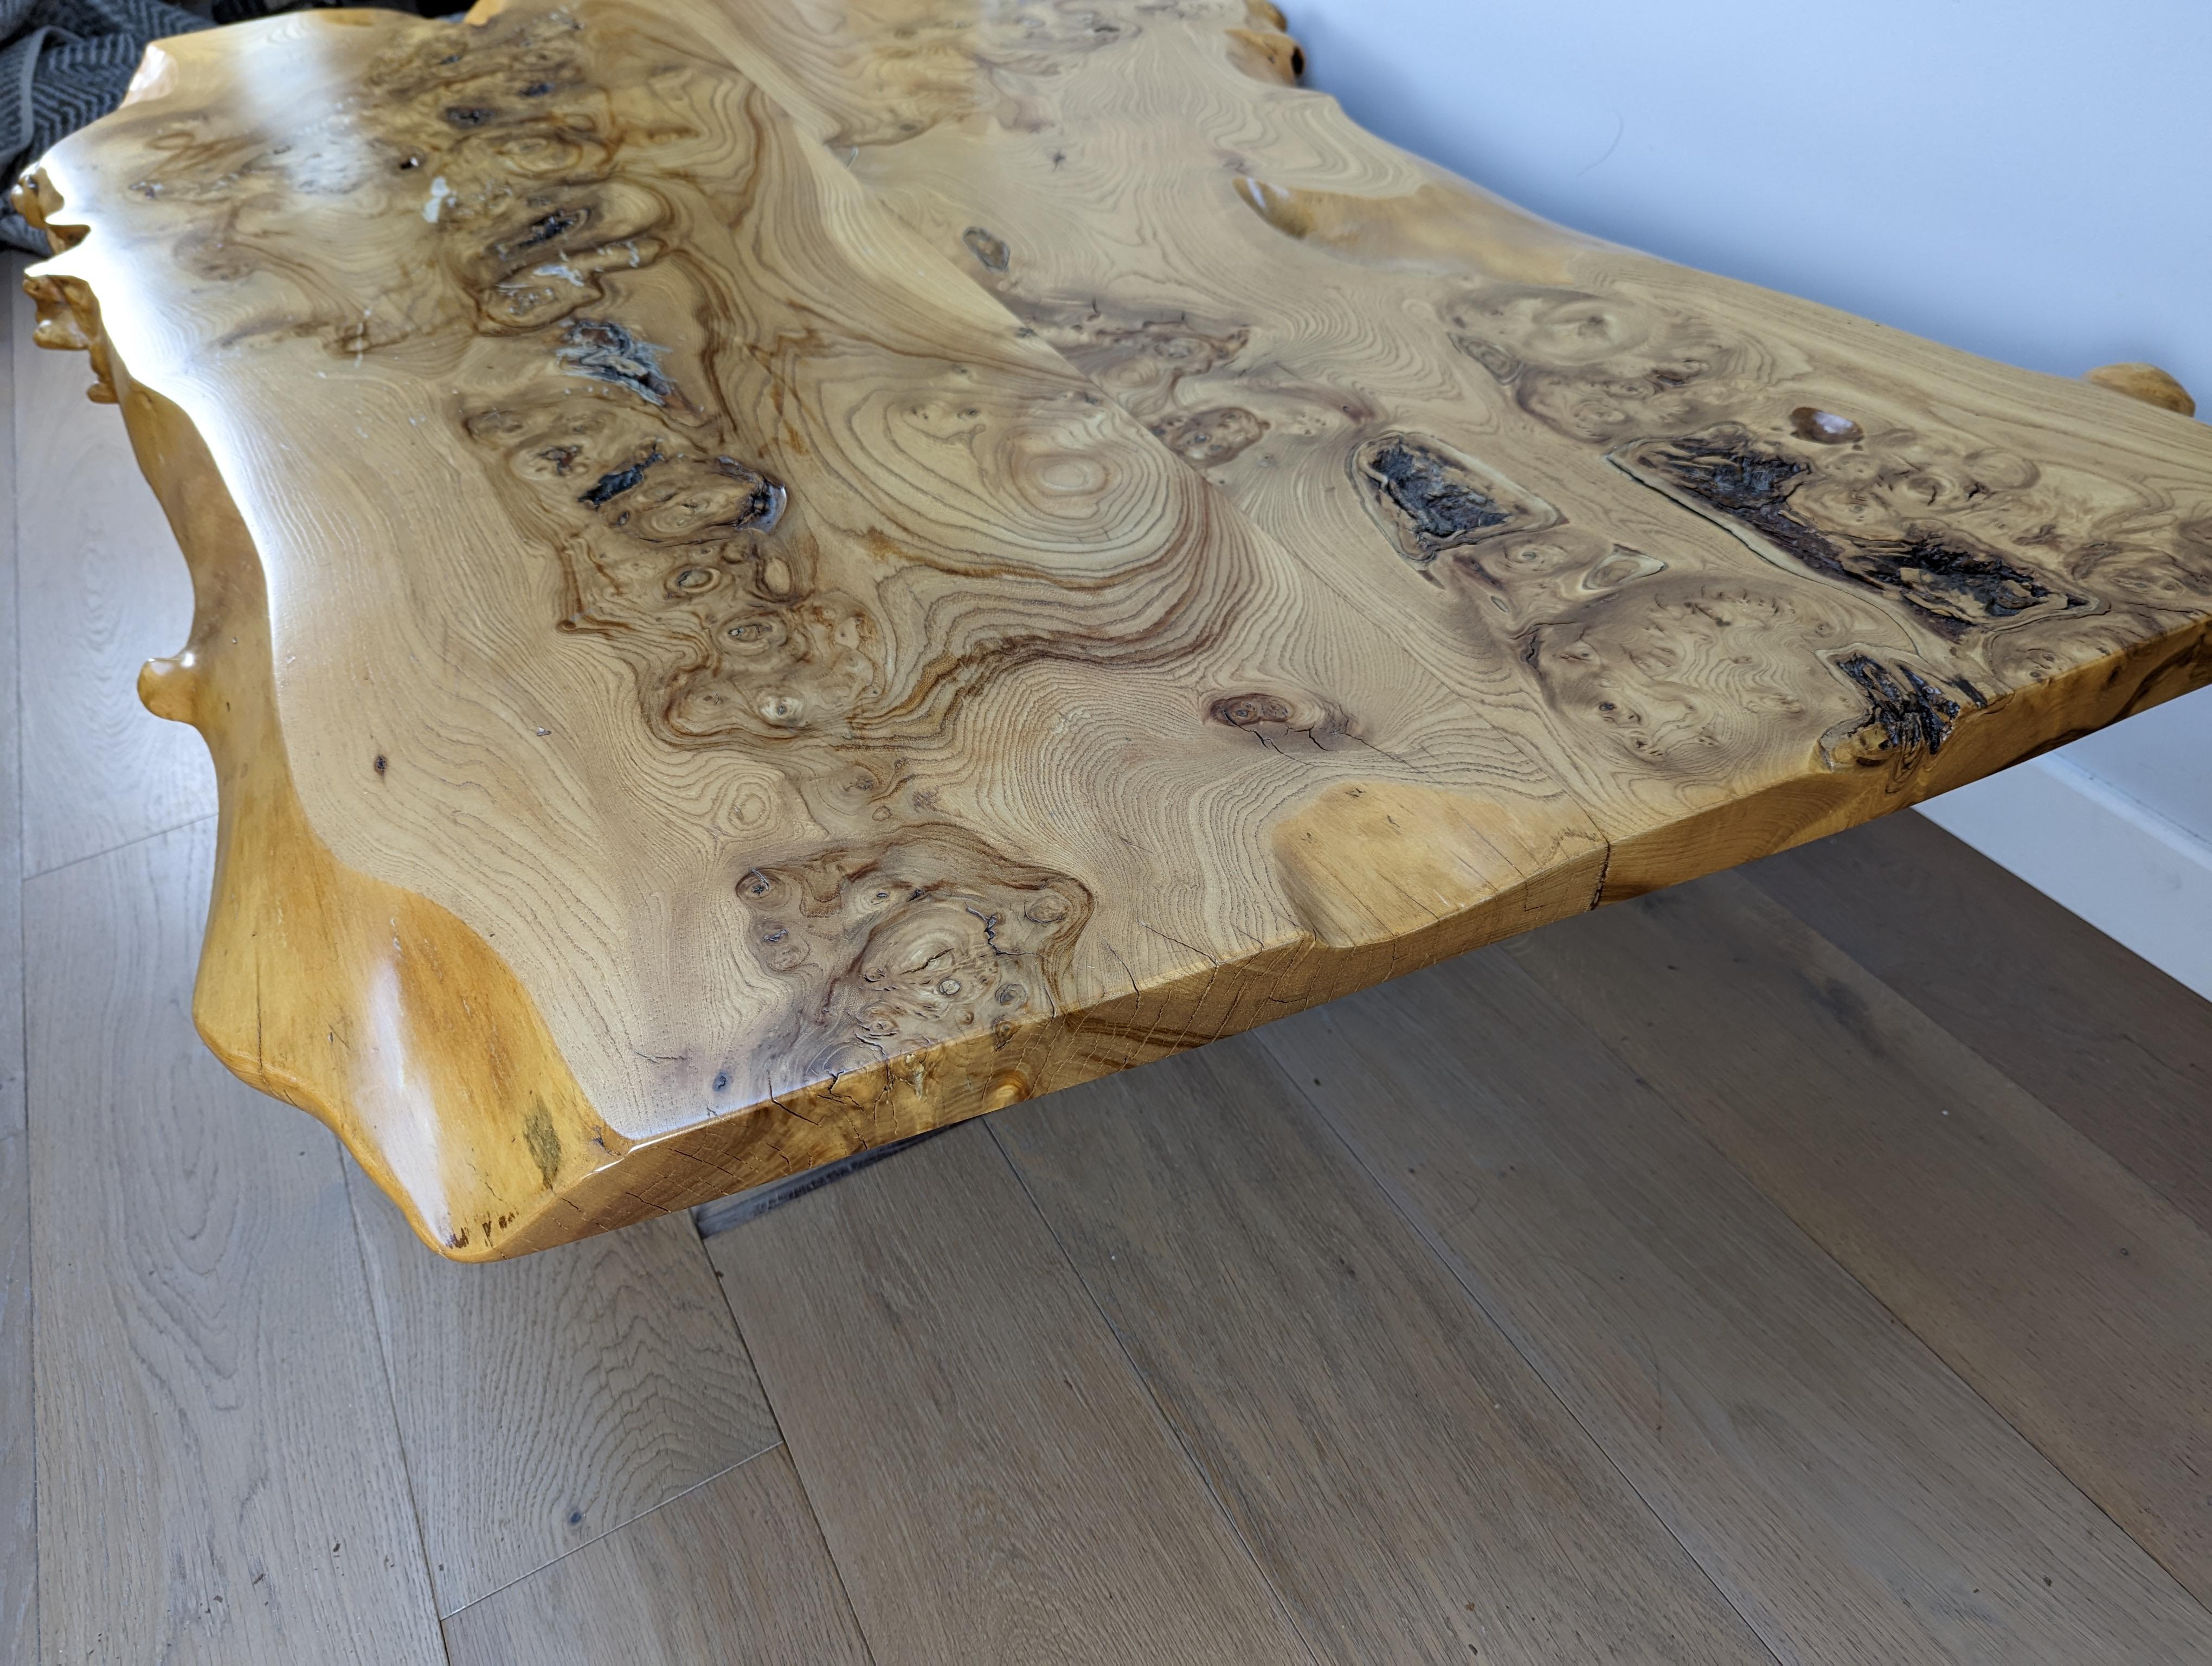 A stunning mid-century burr Elm coffee table in the style of George Nakashima

The table is sat on 2 thick Lucite blocks, to give the impression that the table is floating in mid-air.

The slab is very thick and has been previously polished which